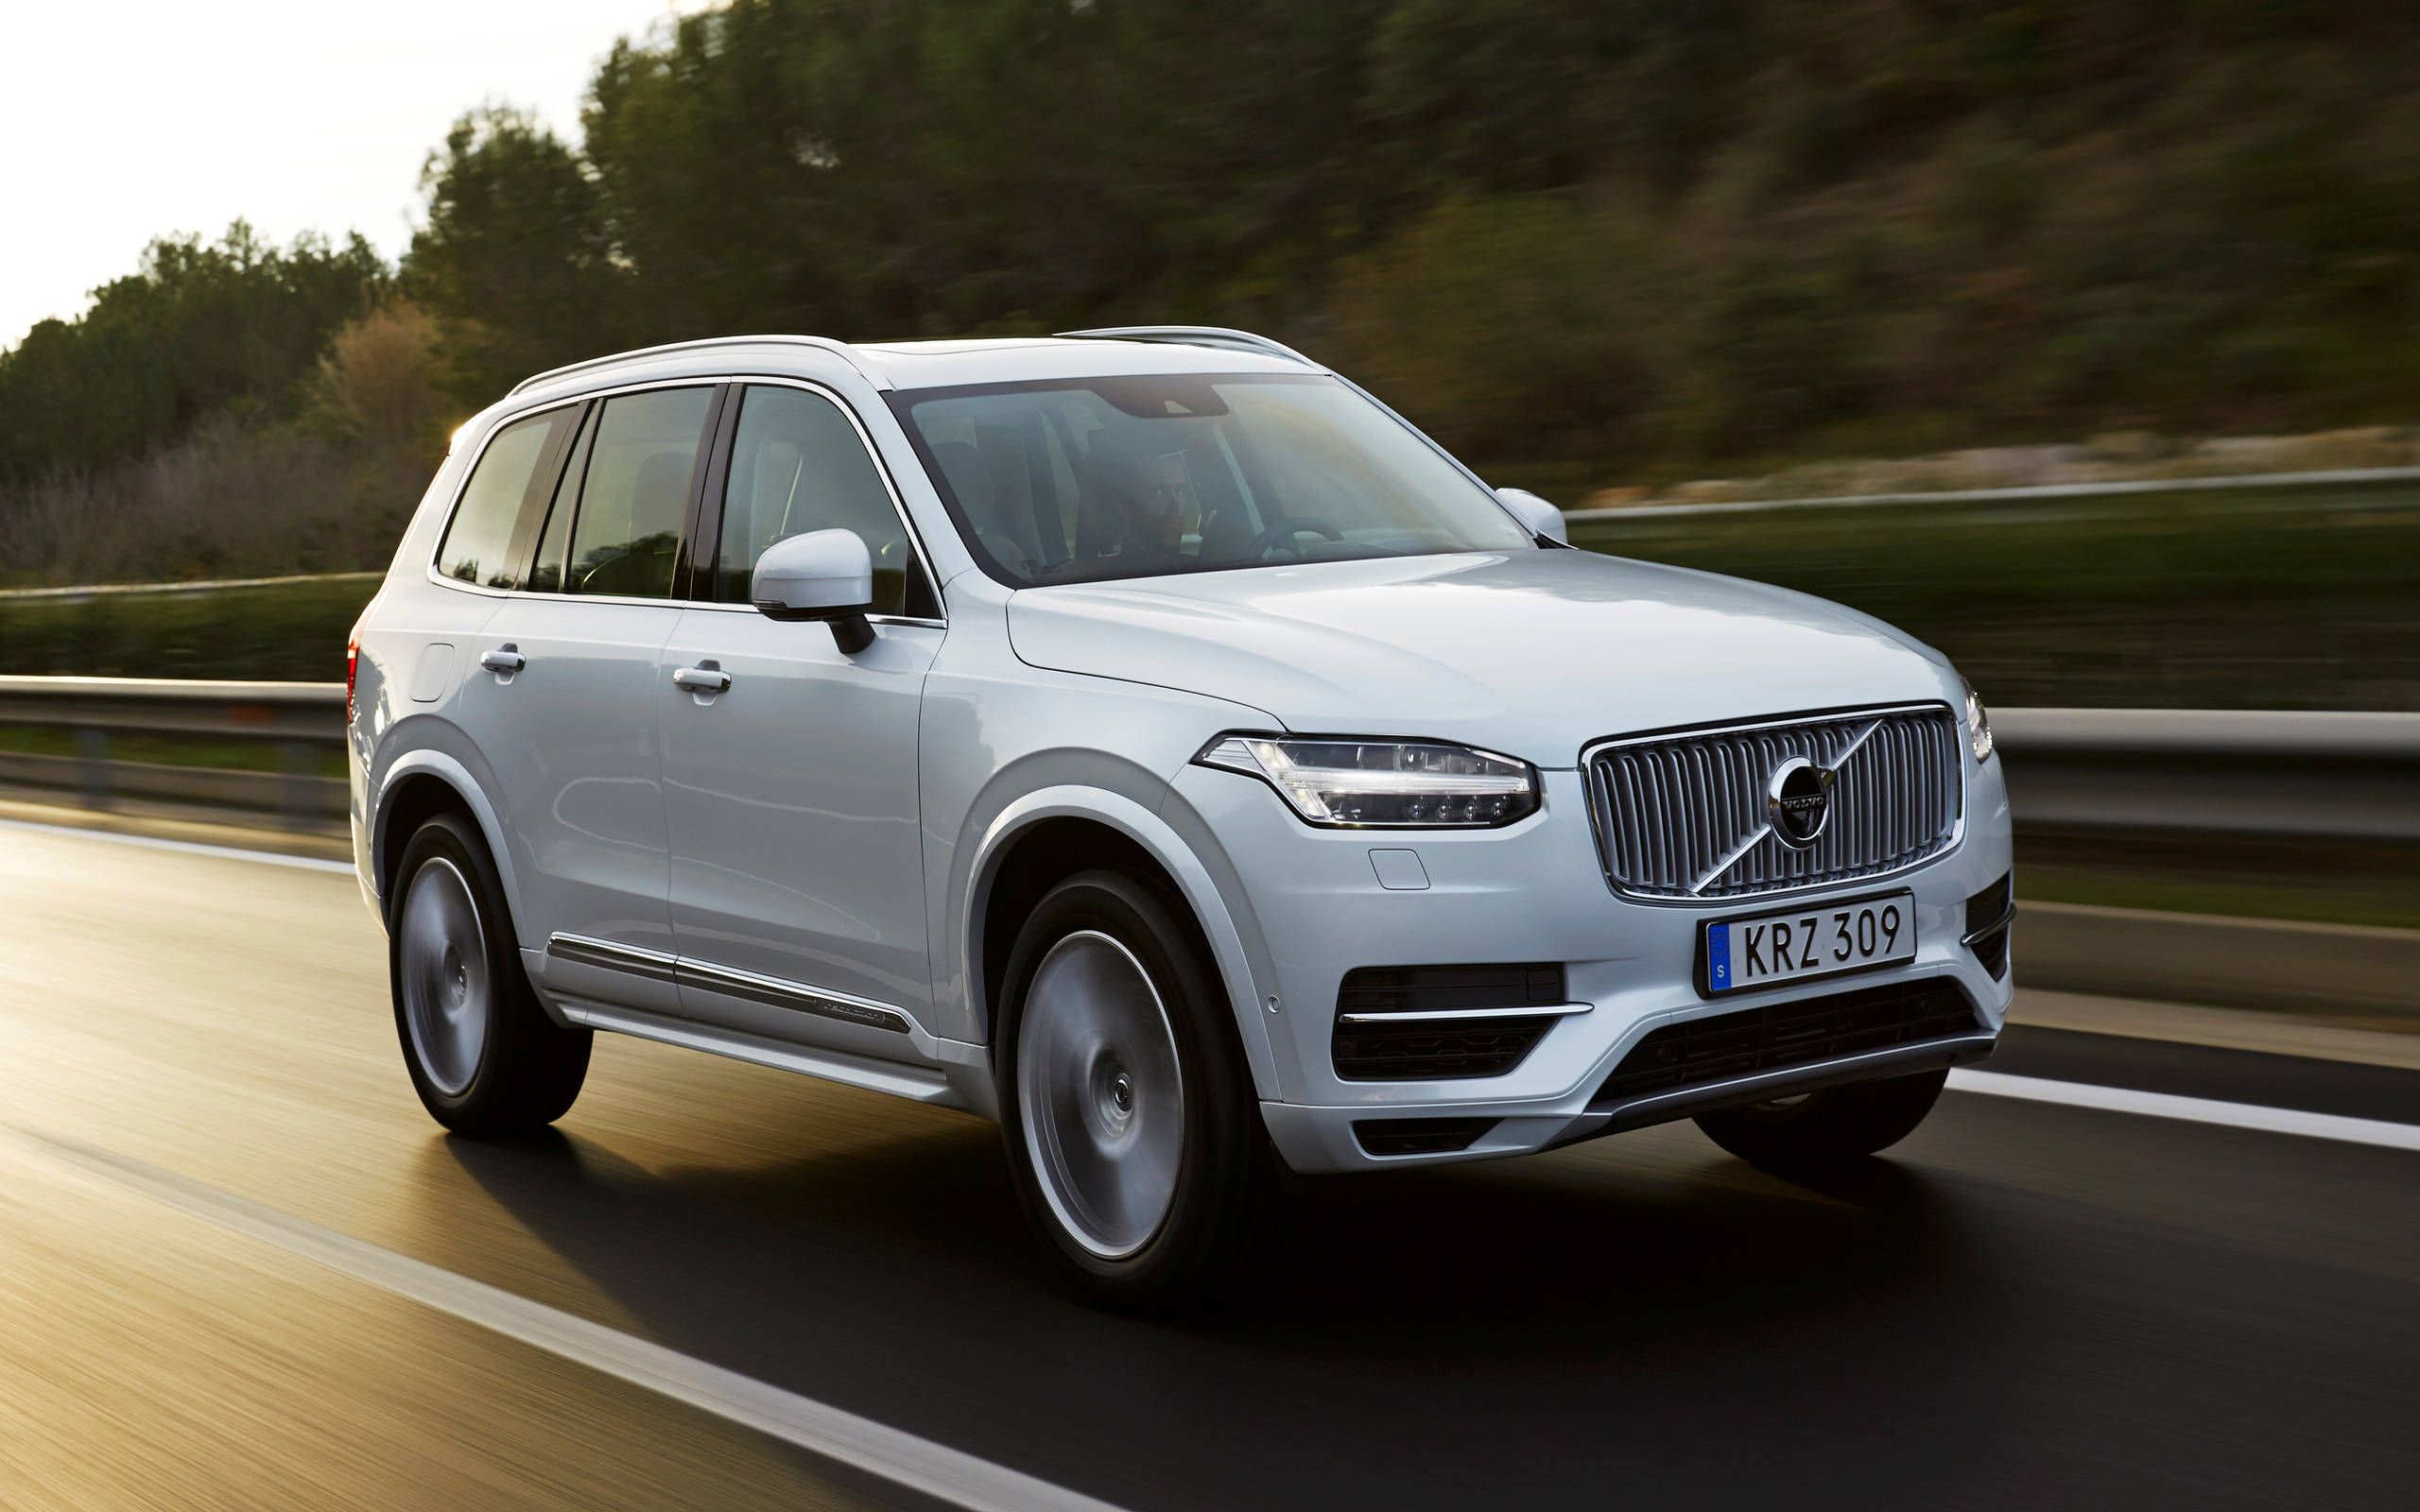 $69,095 buys you the new 2016 Volvo XC90 T8 plug-in hybrid SUV